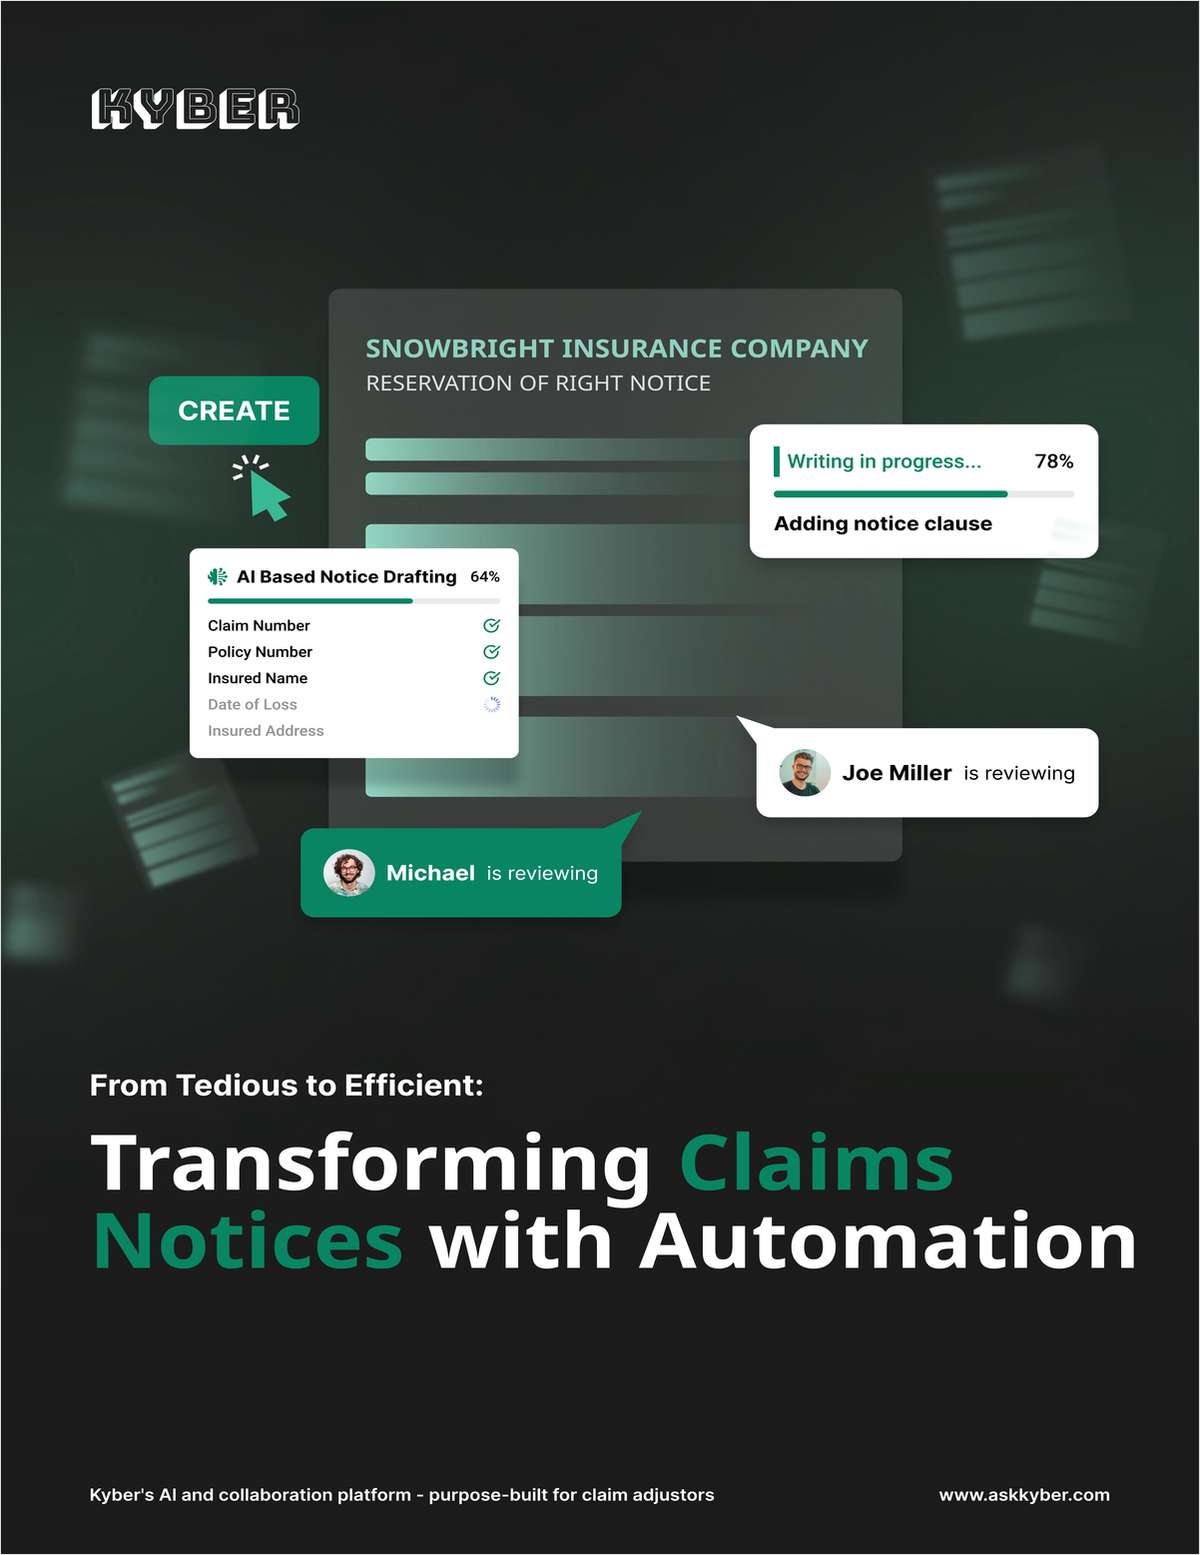 From Tedious to Efficient: Transforming Claims Notices with Automation link